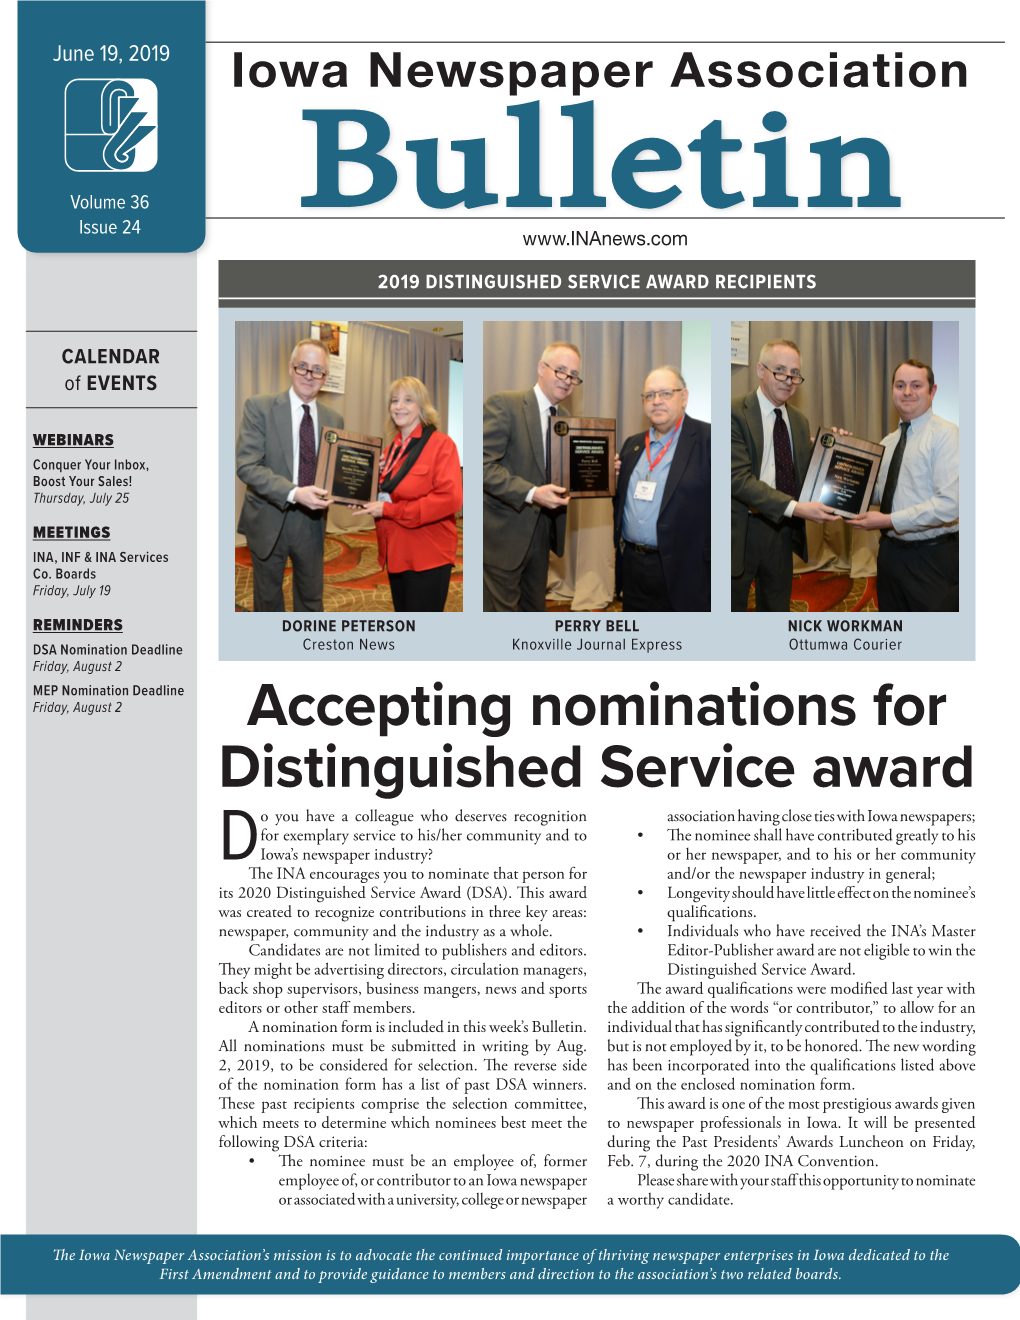 Accepting Nominations for Distinguished Service Award